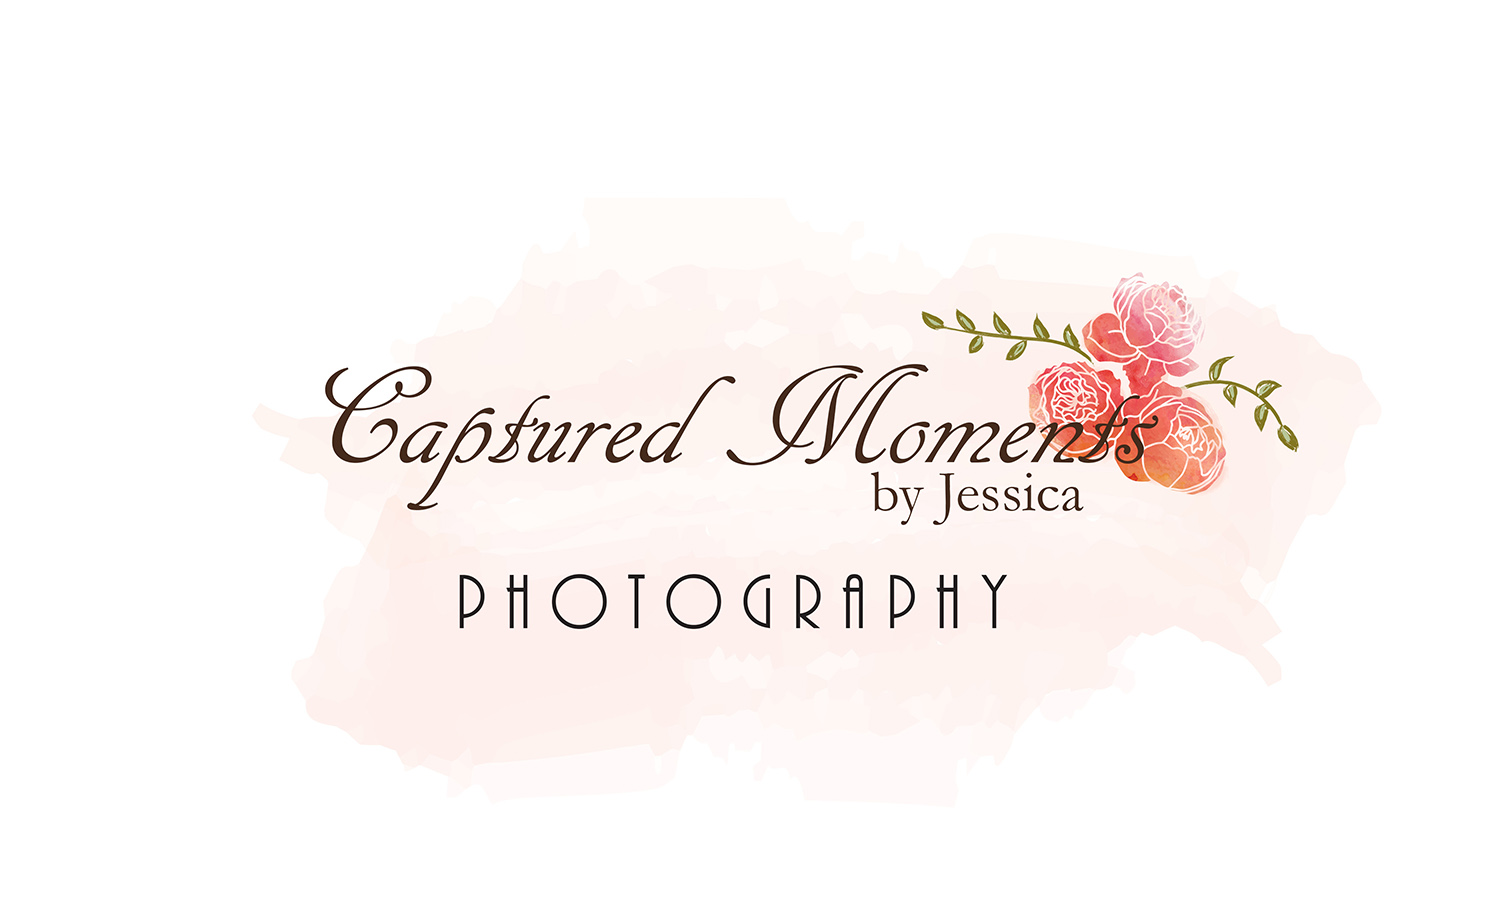 Captured Moments by Jessica